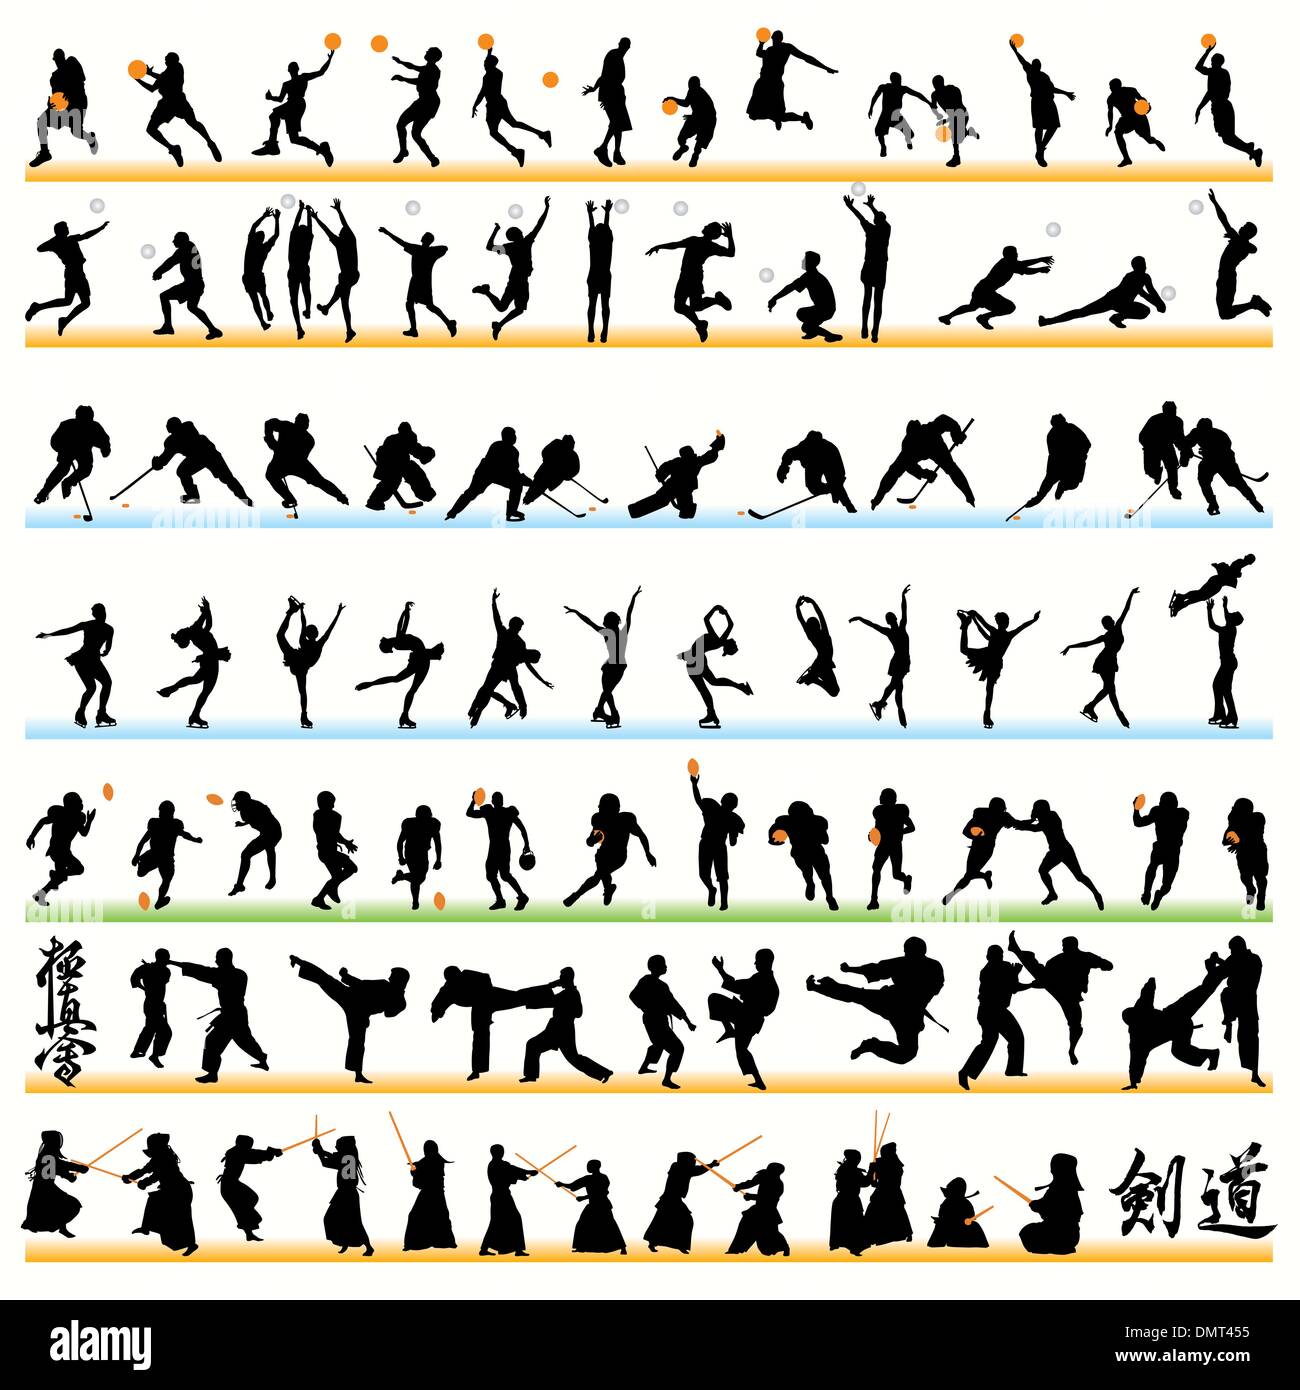 90 Sport Silhouettes Set Stock Vector